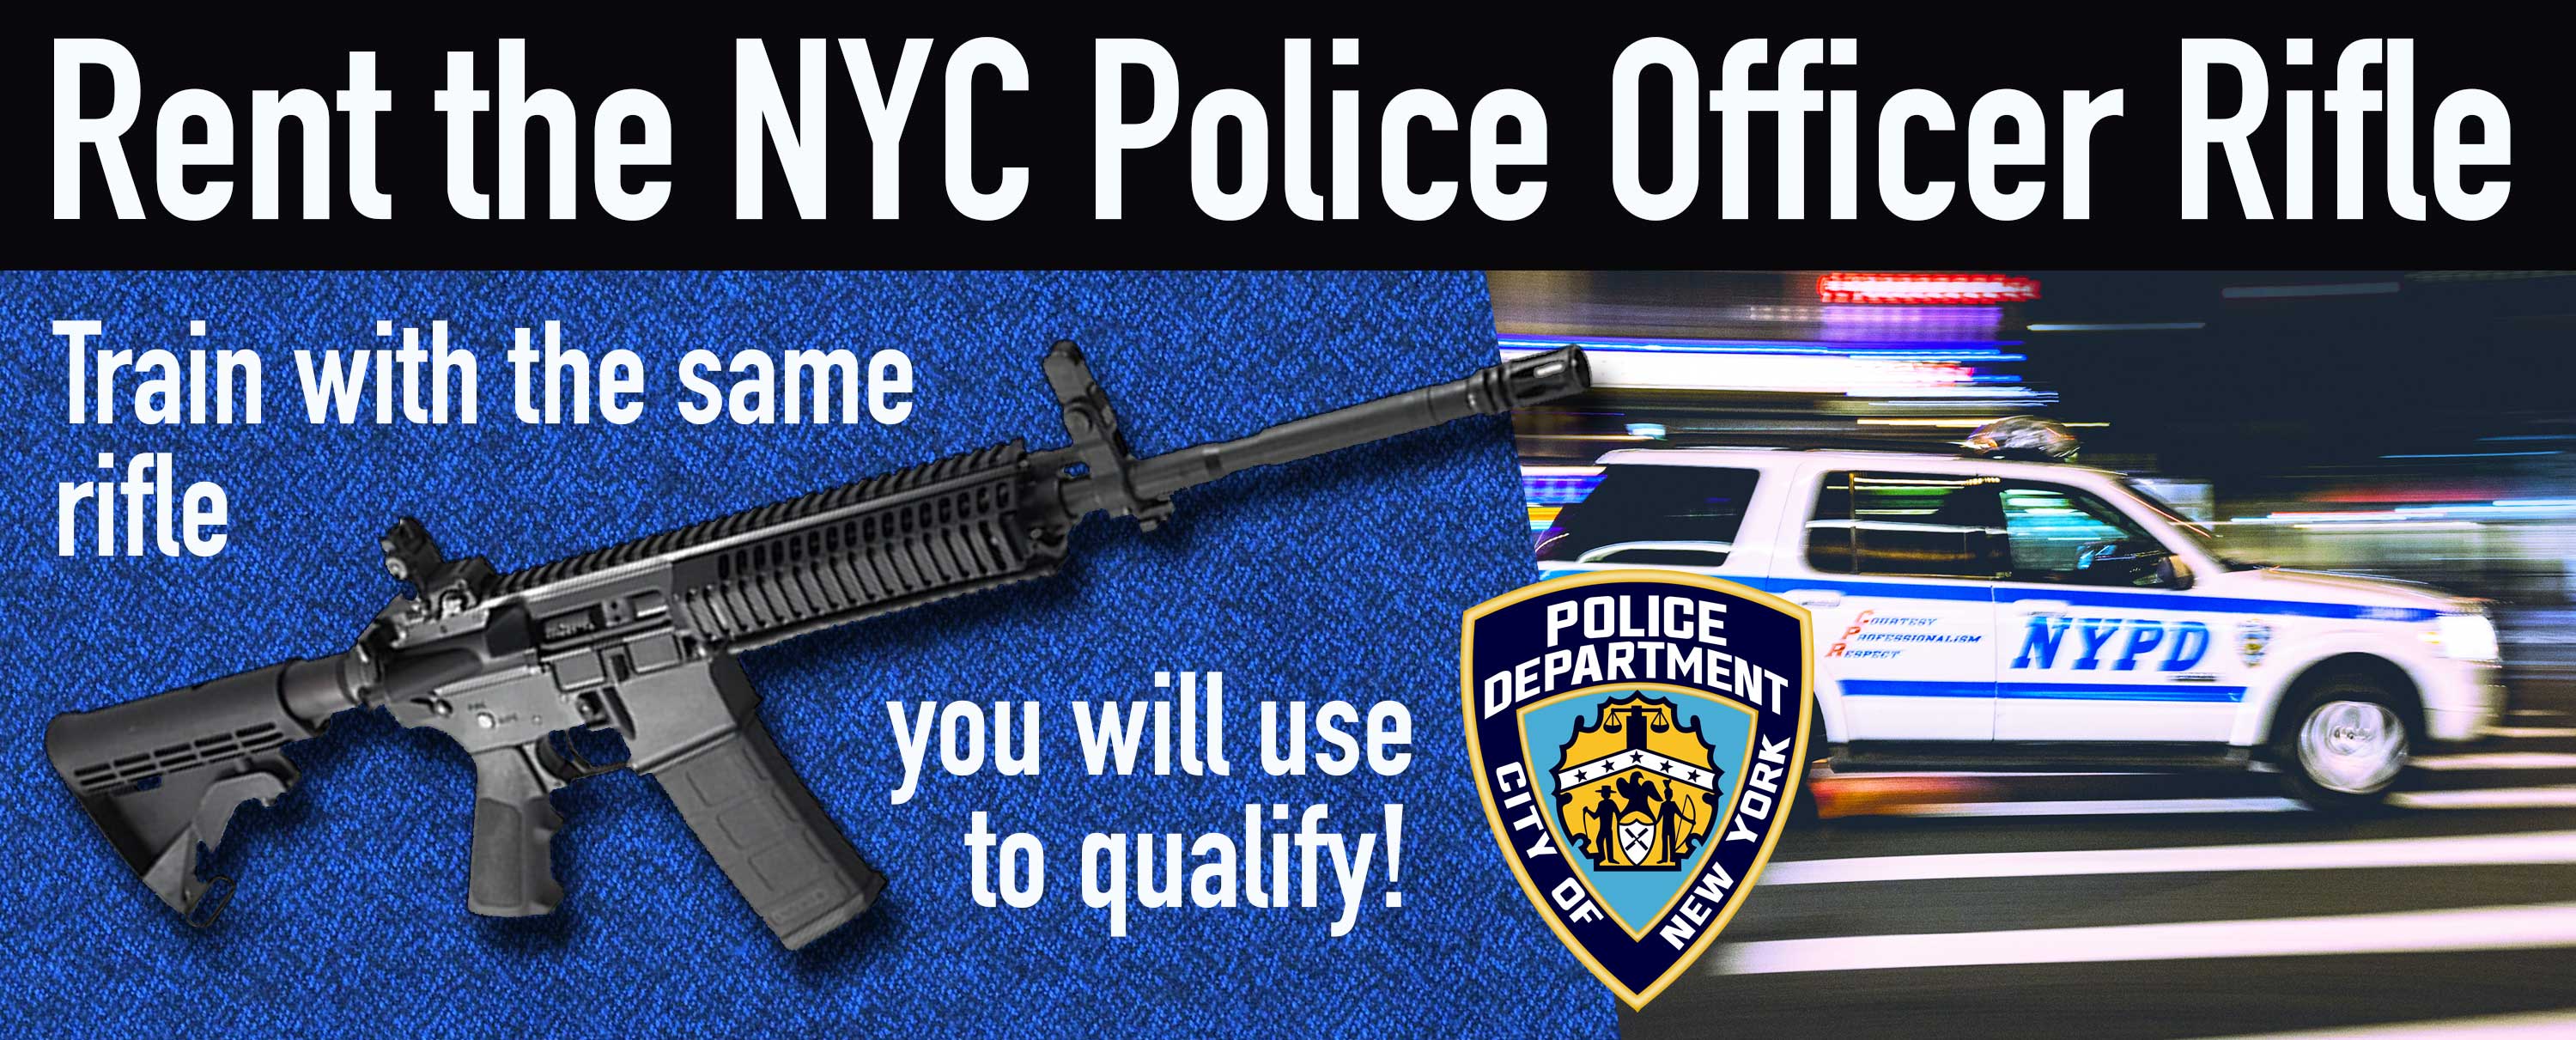 NYPD Rifle Qualification - NYPD Gun Rental